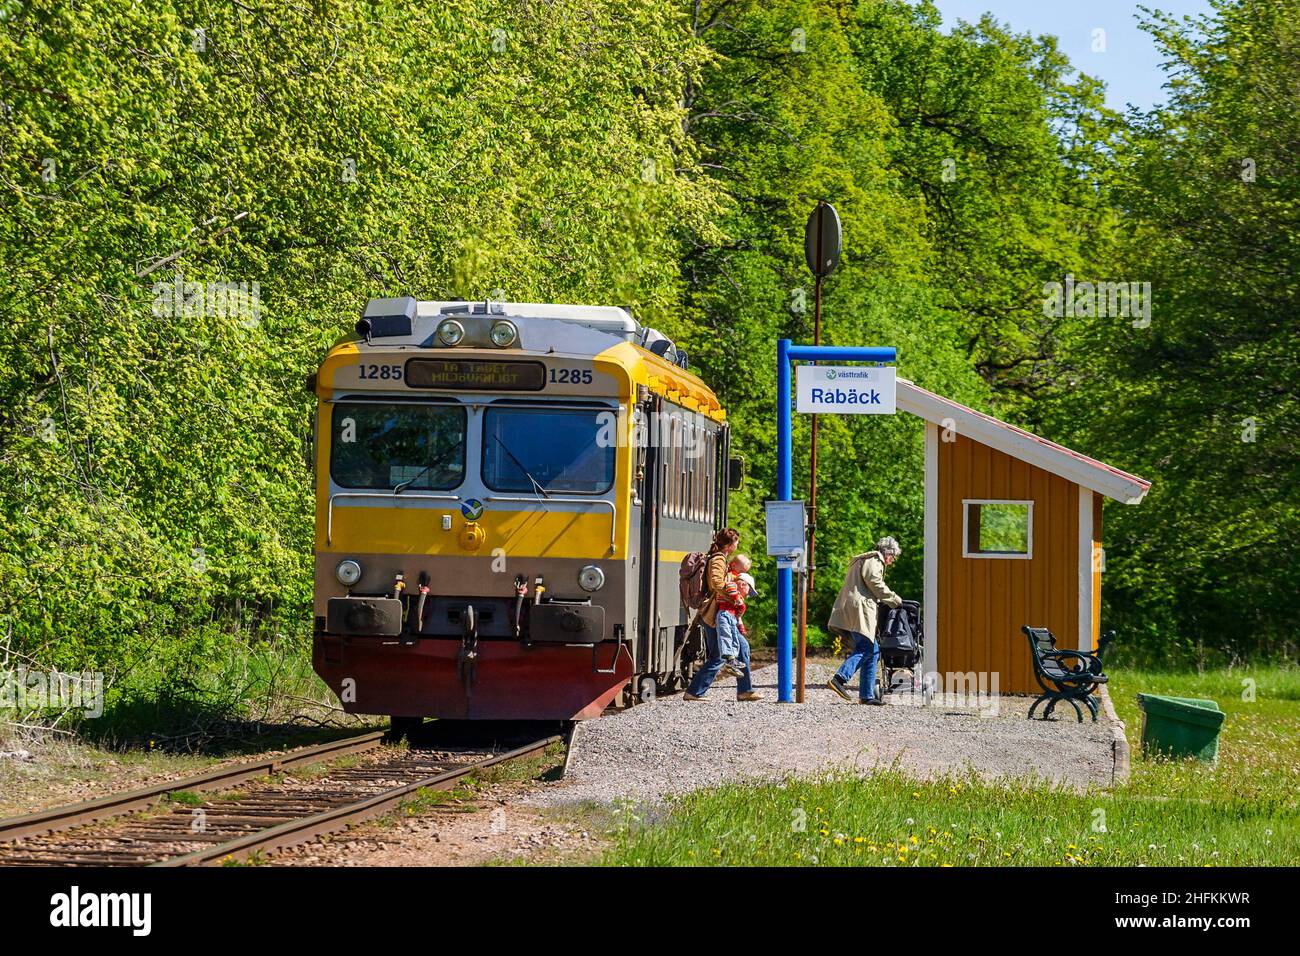 Train stop in the countryside with disembarking passengers Stock Photo